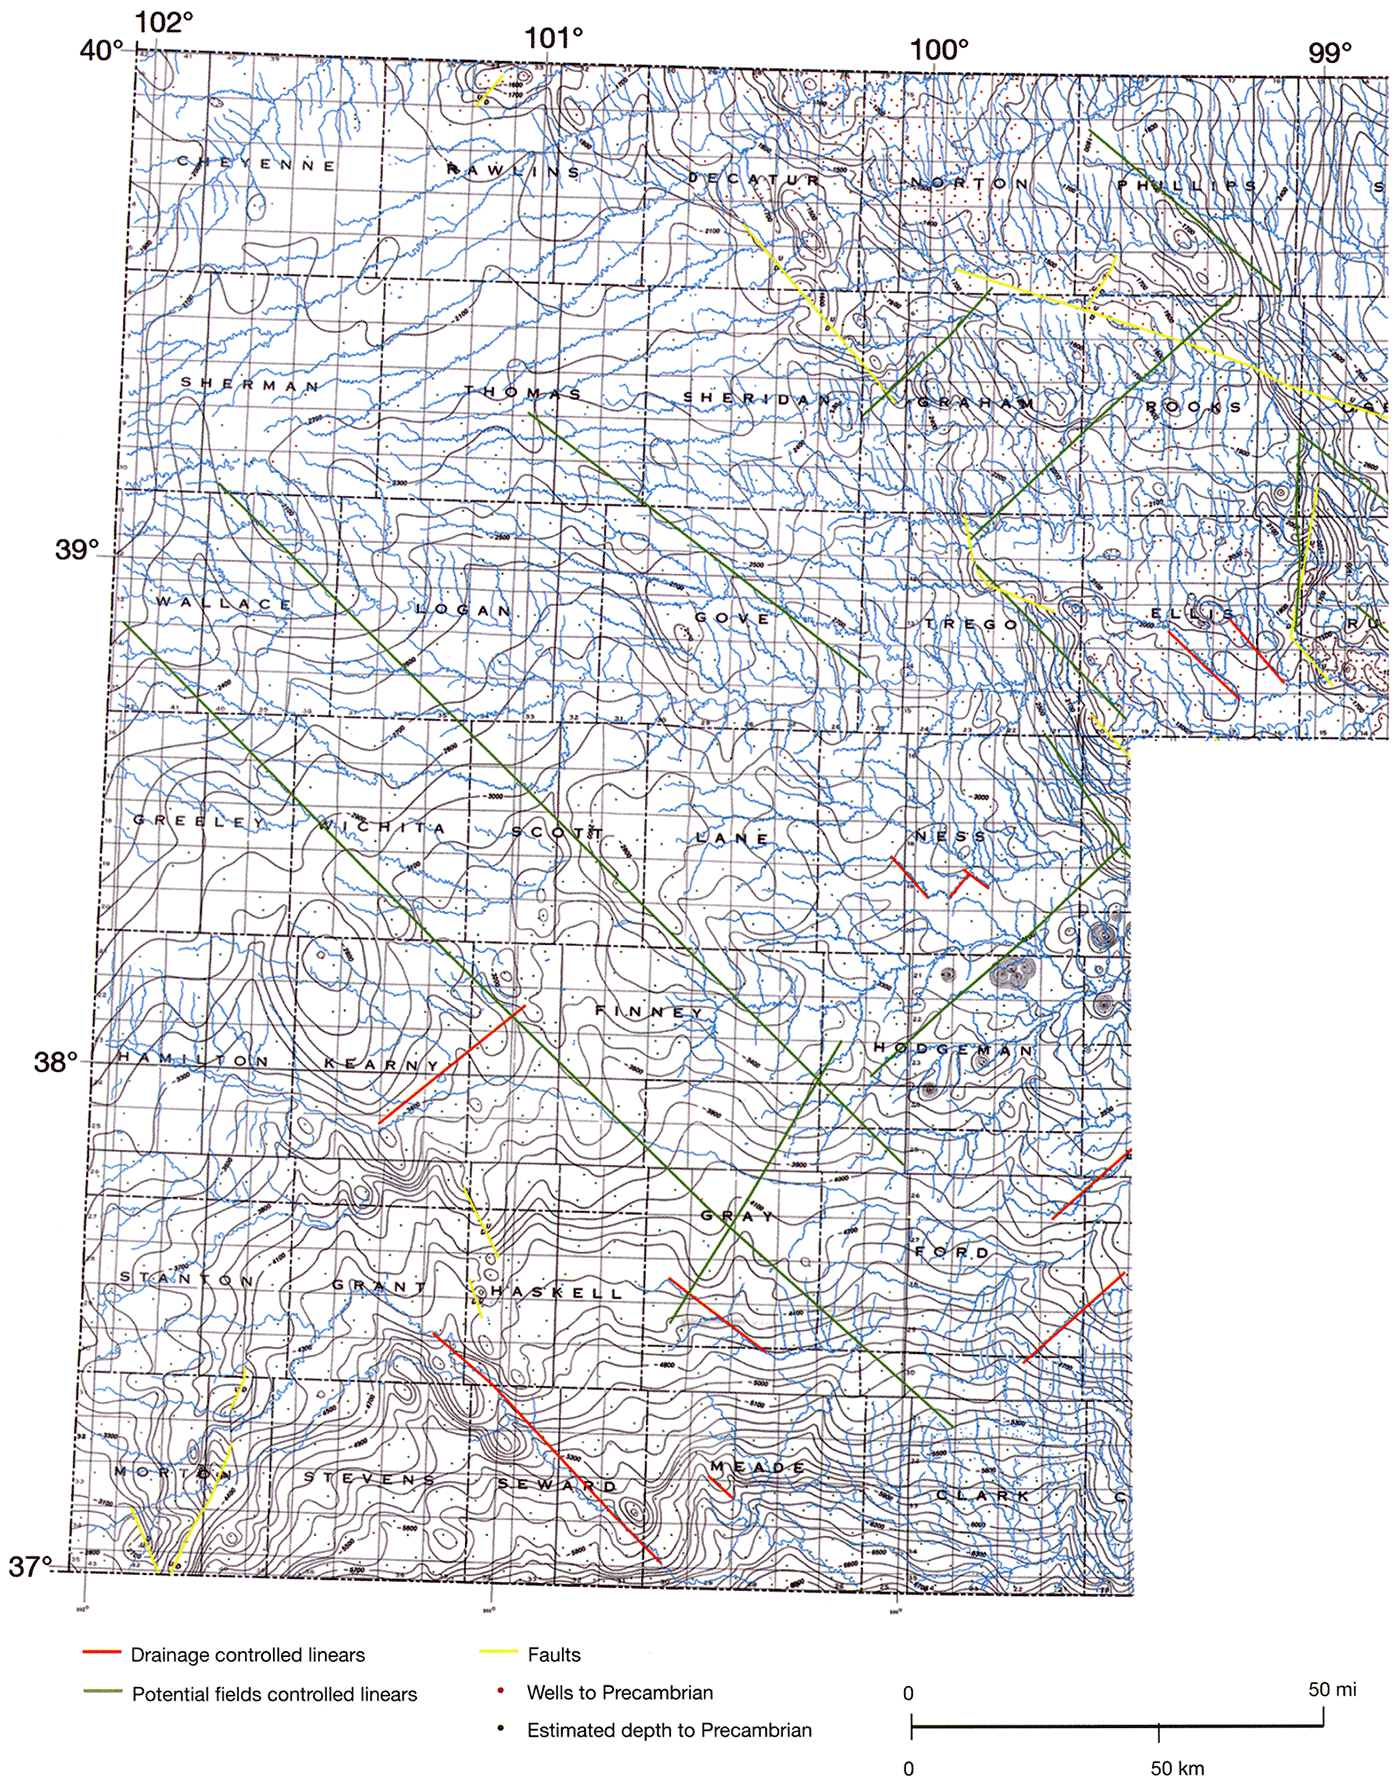 Cole's (1976) map of the elevation of the top of the Precambrian in Kansas.